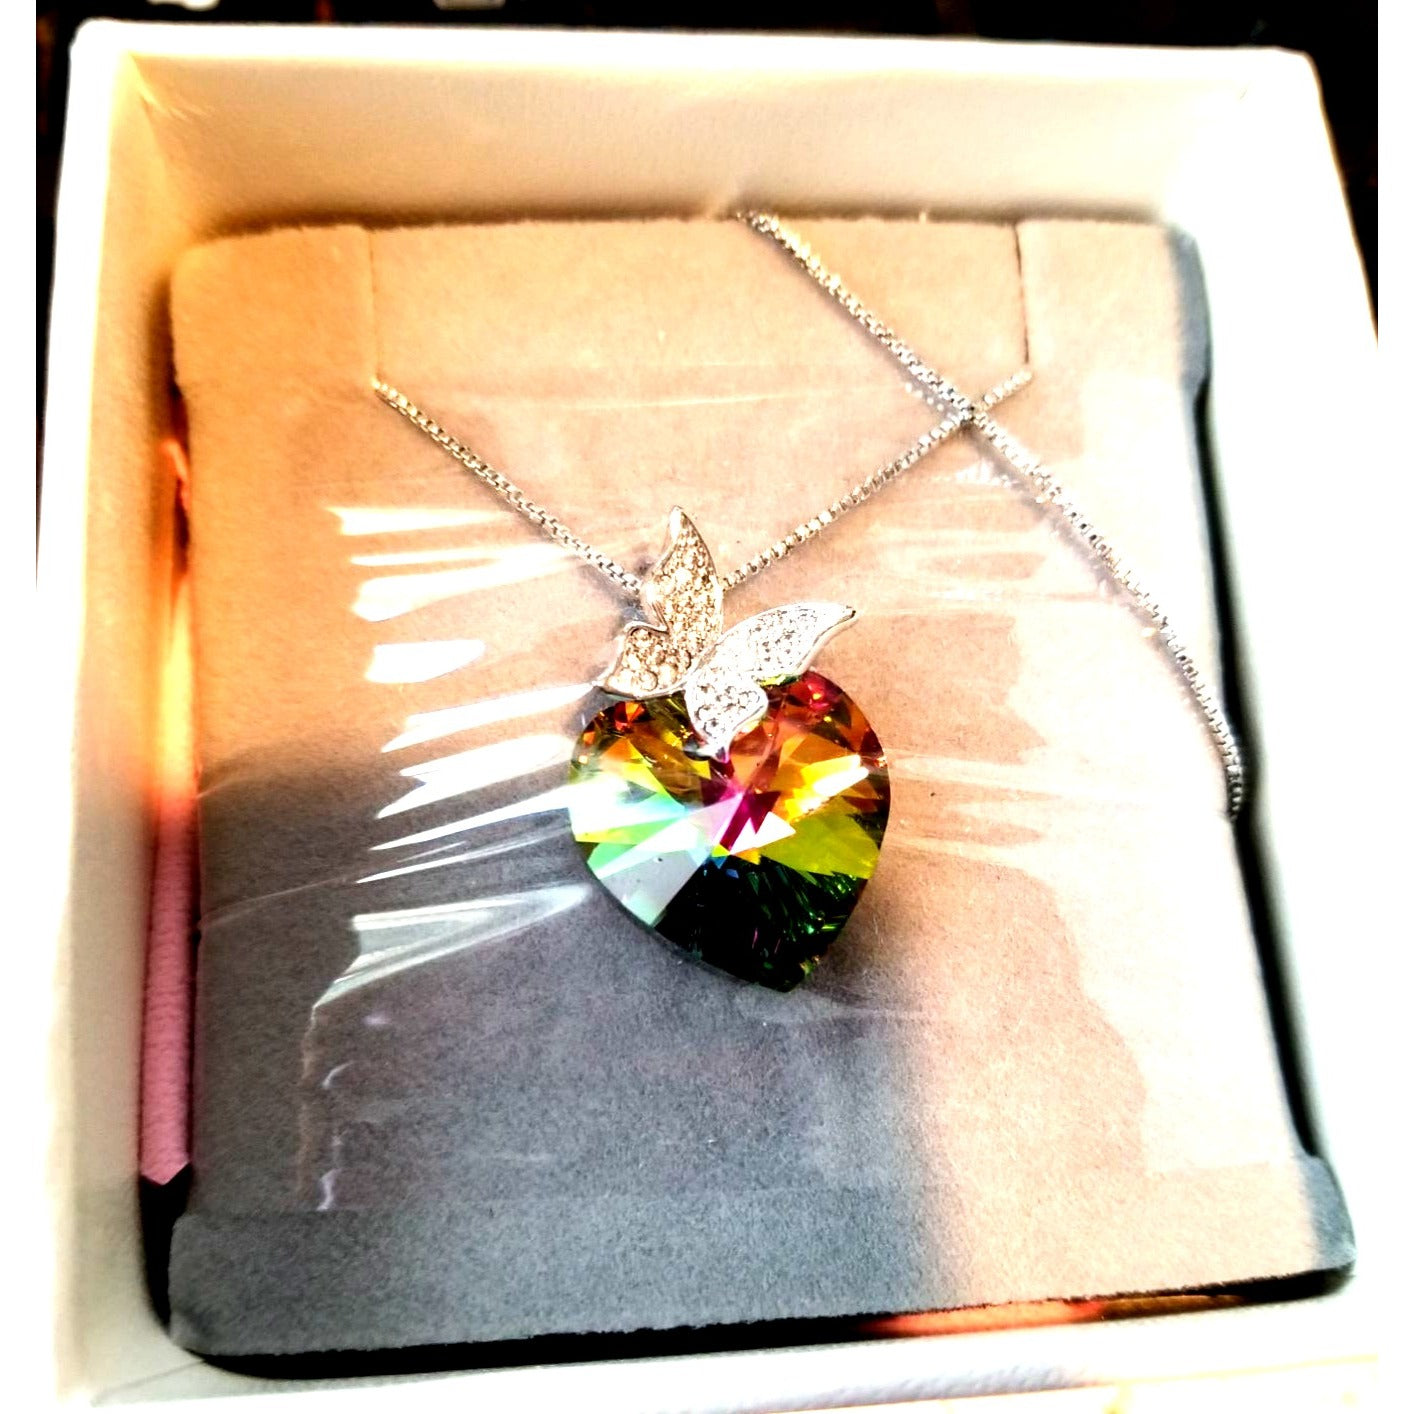 Necklace T400 Jewelers Butterfly Wing Pendant Heart shaped Swarovski Crystal  Bow Box Cleaning Cloth Care Instructions